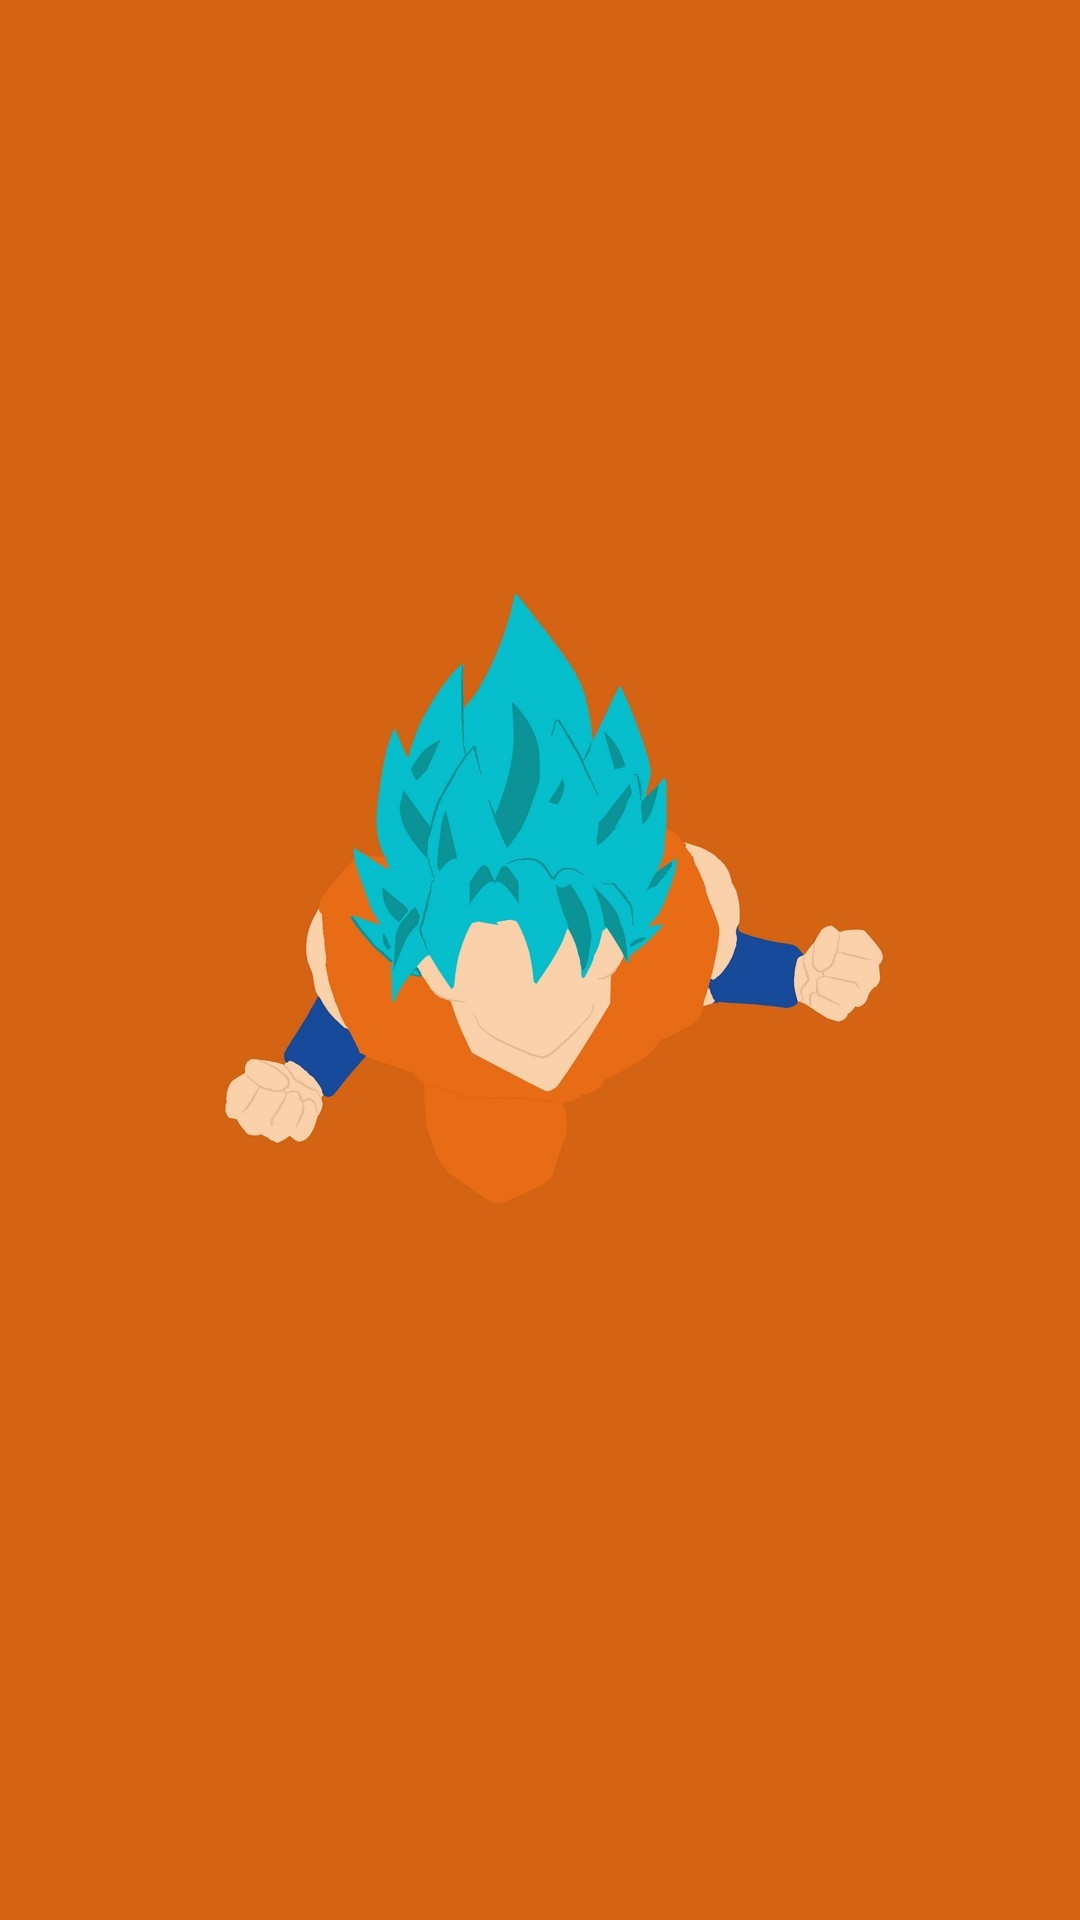 Goku SSJ Mobile Wallpaper with high-resolution 1080x1920 pixel. You can use and set as wallpaper for Notebook Screensavers, Mac Wallpapers, Mobile Home Screen, iPhone or Android Phones Lock Screen